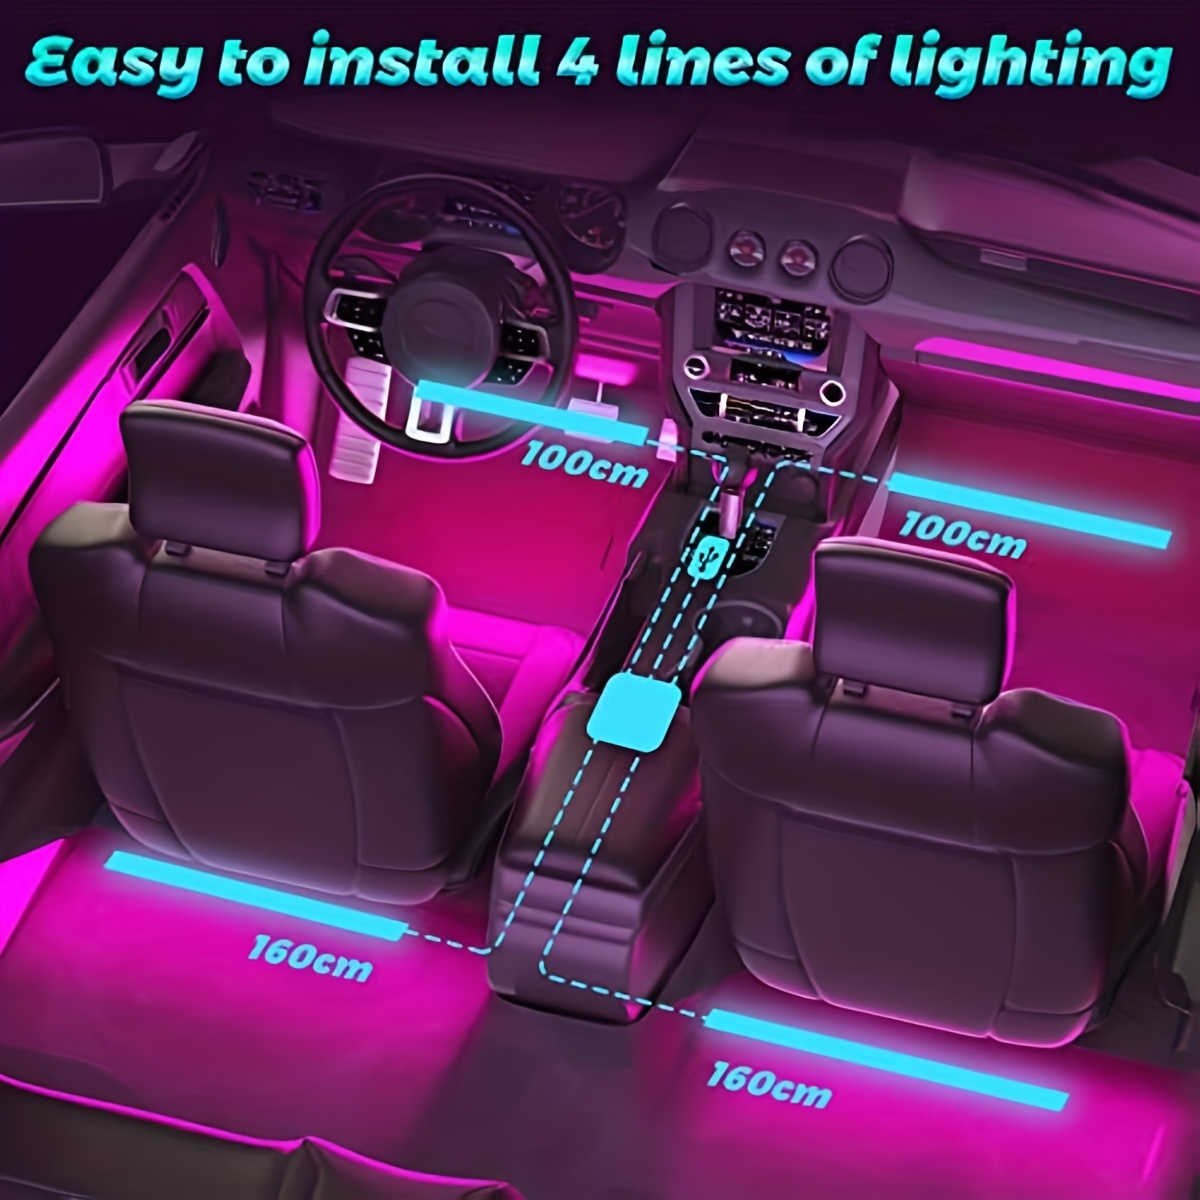 48rgb Car Led Lights Car Accessories App Control Inside Car Light With Usb  Port Music Sync Color Change Lights For Cars Interior App Control, High-quality & Affordable